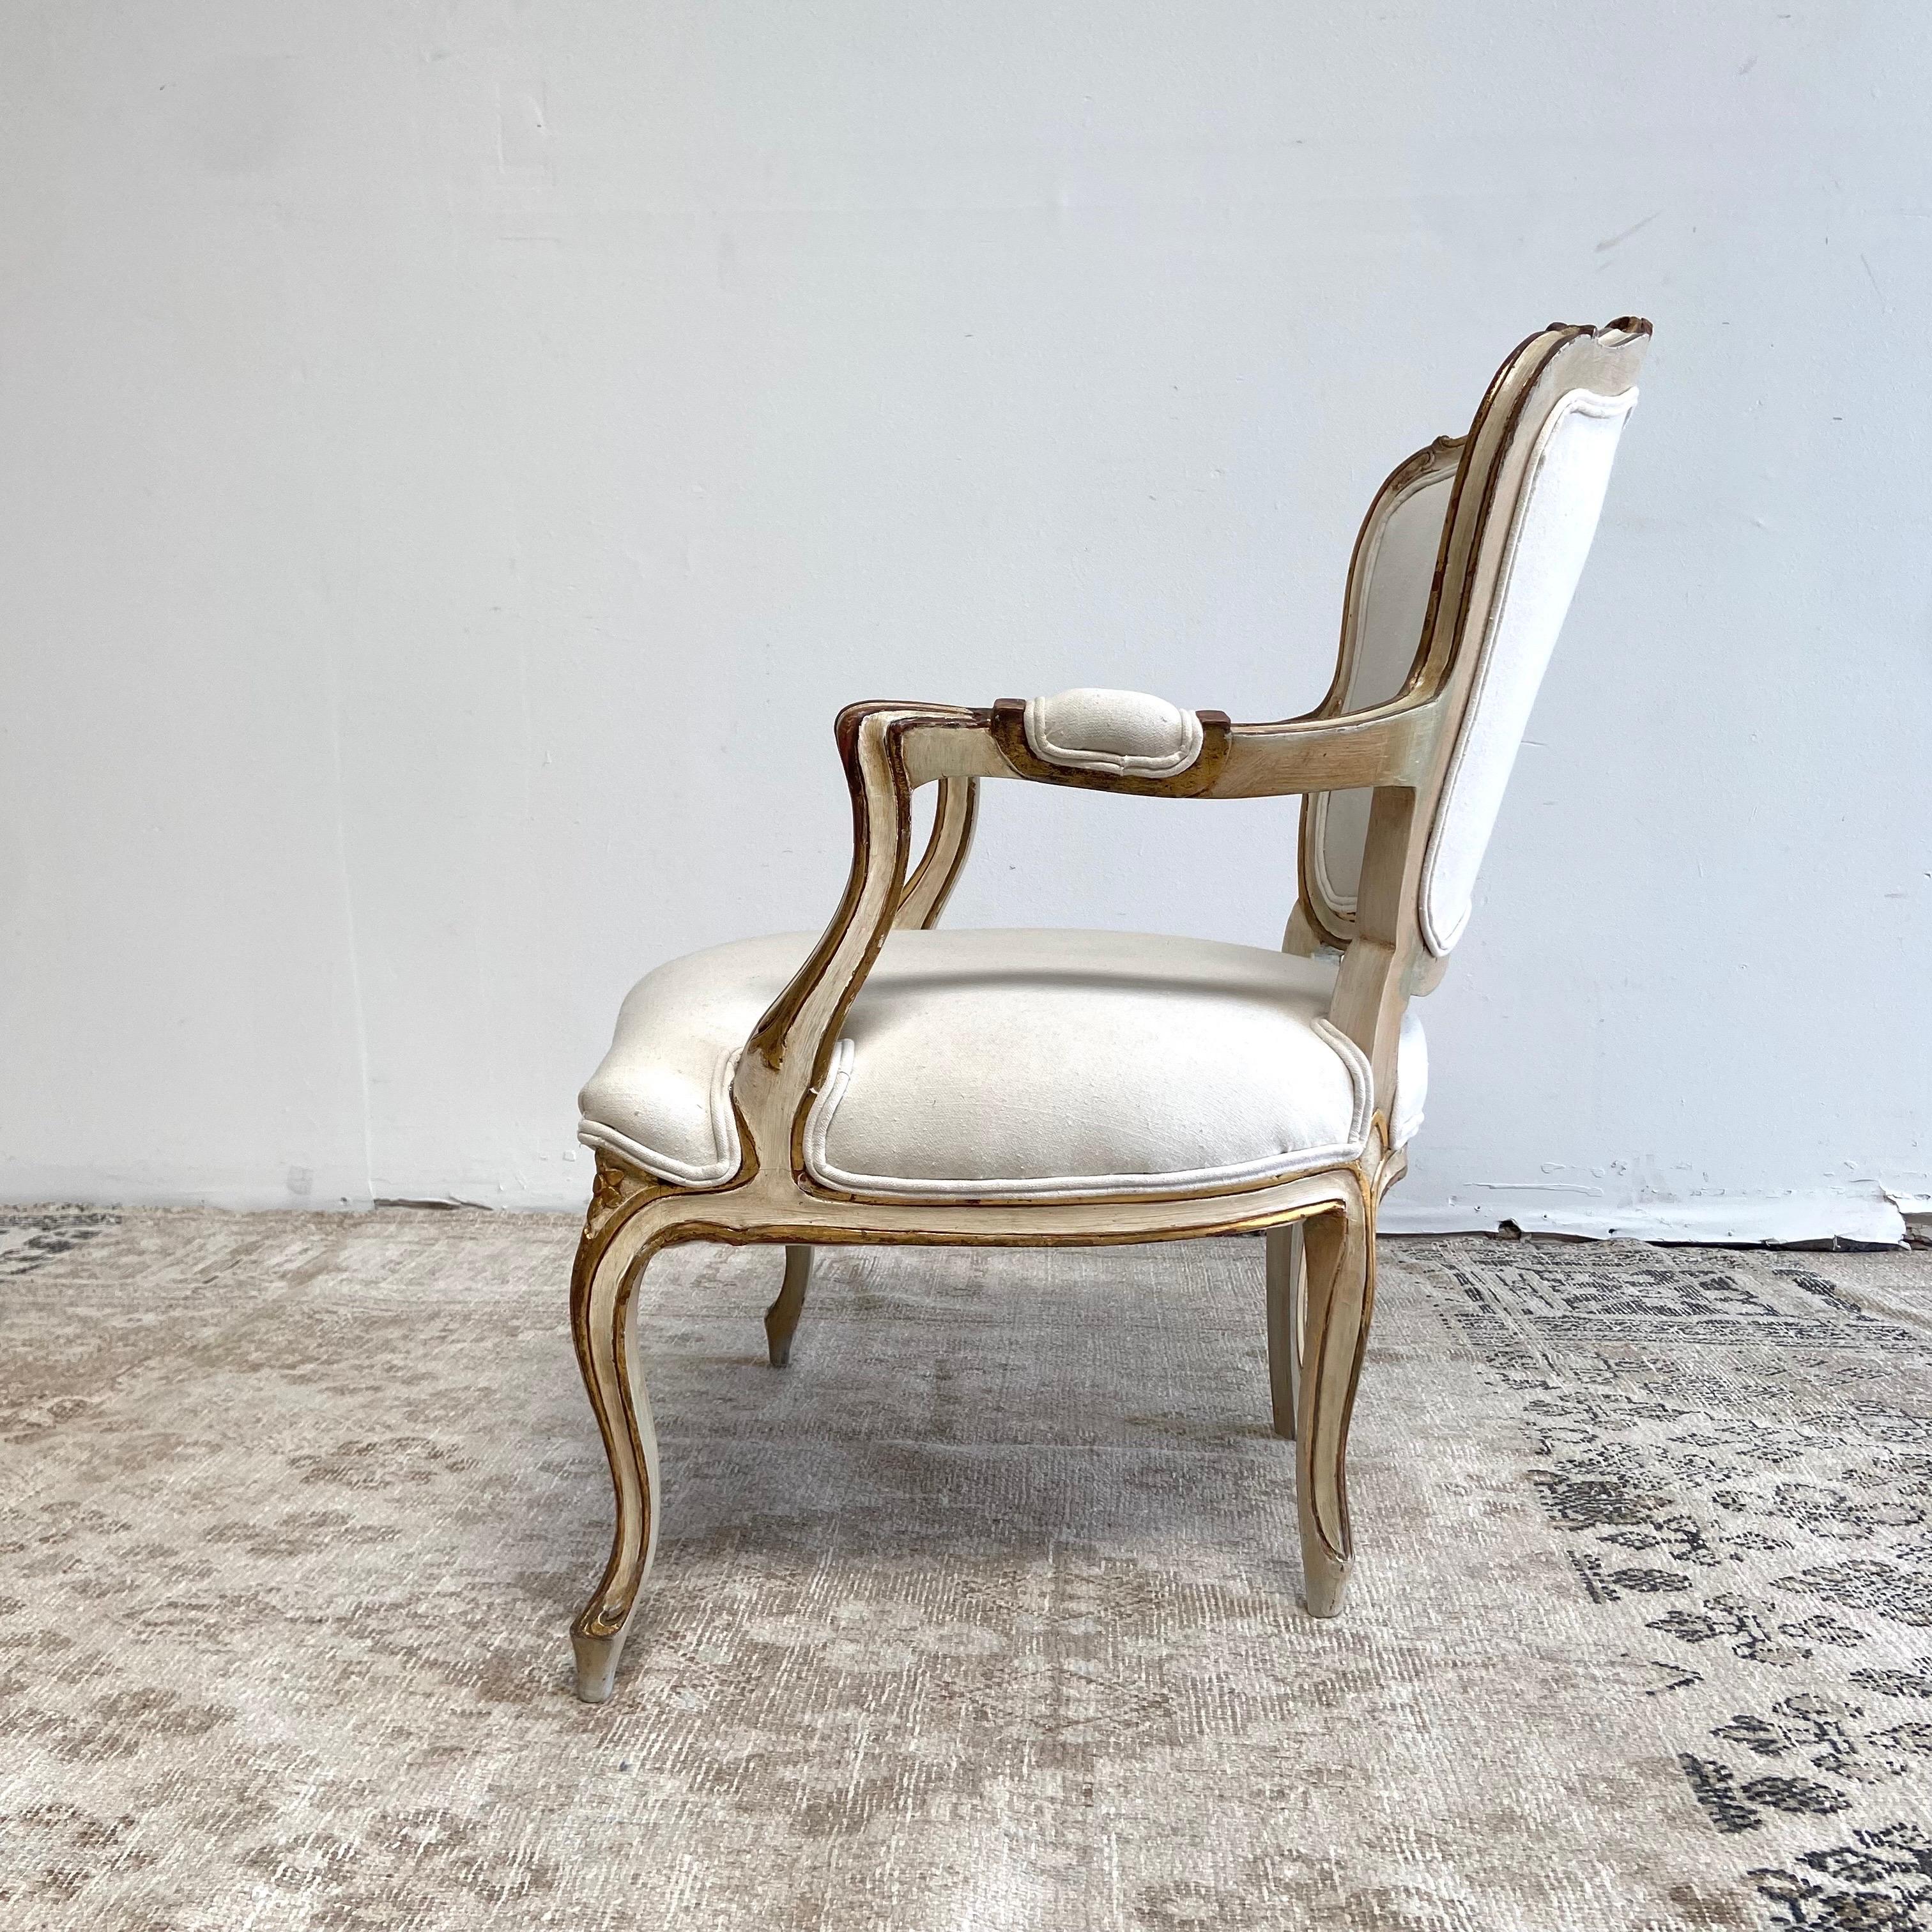 20th Century Vintage Open Arm Chair with Original Paint and Gilt Wood Finish For Sale